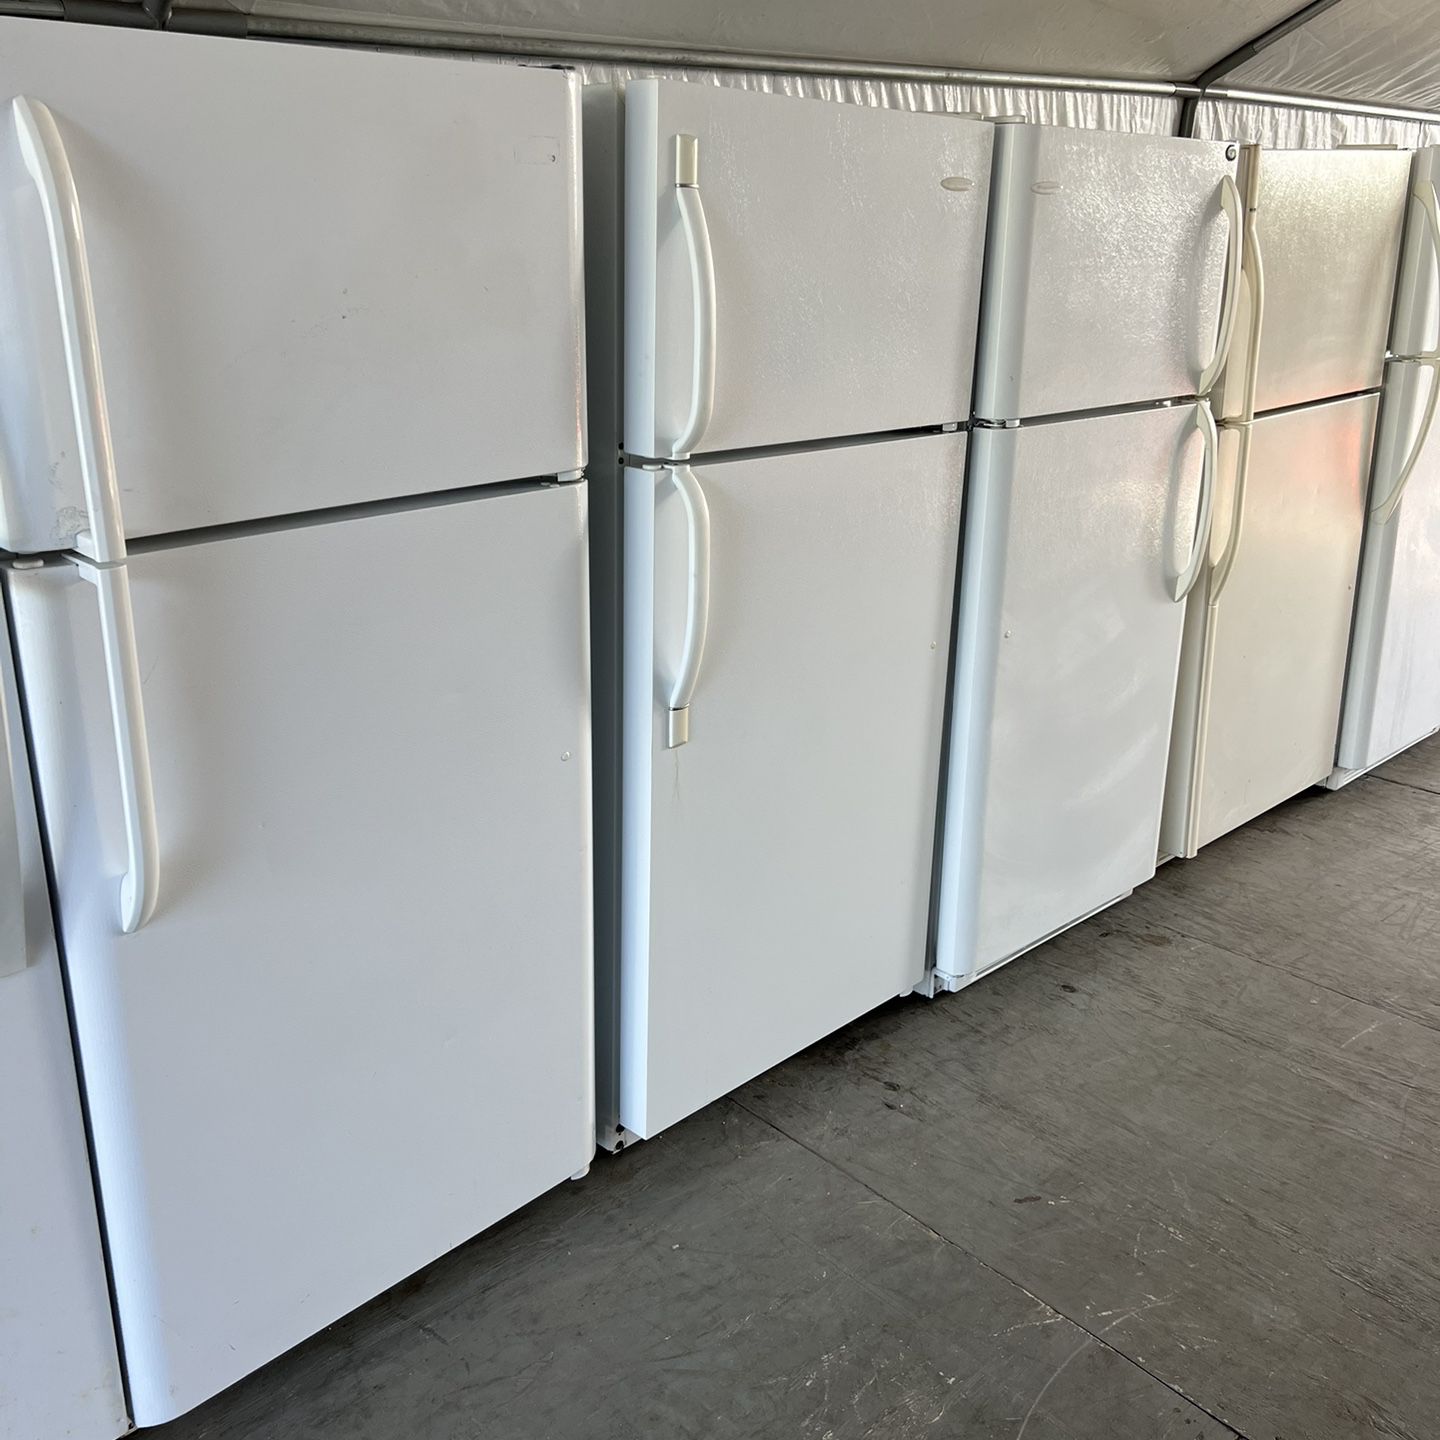 Top Freezer Bottom Refrigerator 28inches Available 30inches Available 33inches Available  60 day warranty/ Located at:📍5415 Carmack Rd Tampa Fl 33610